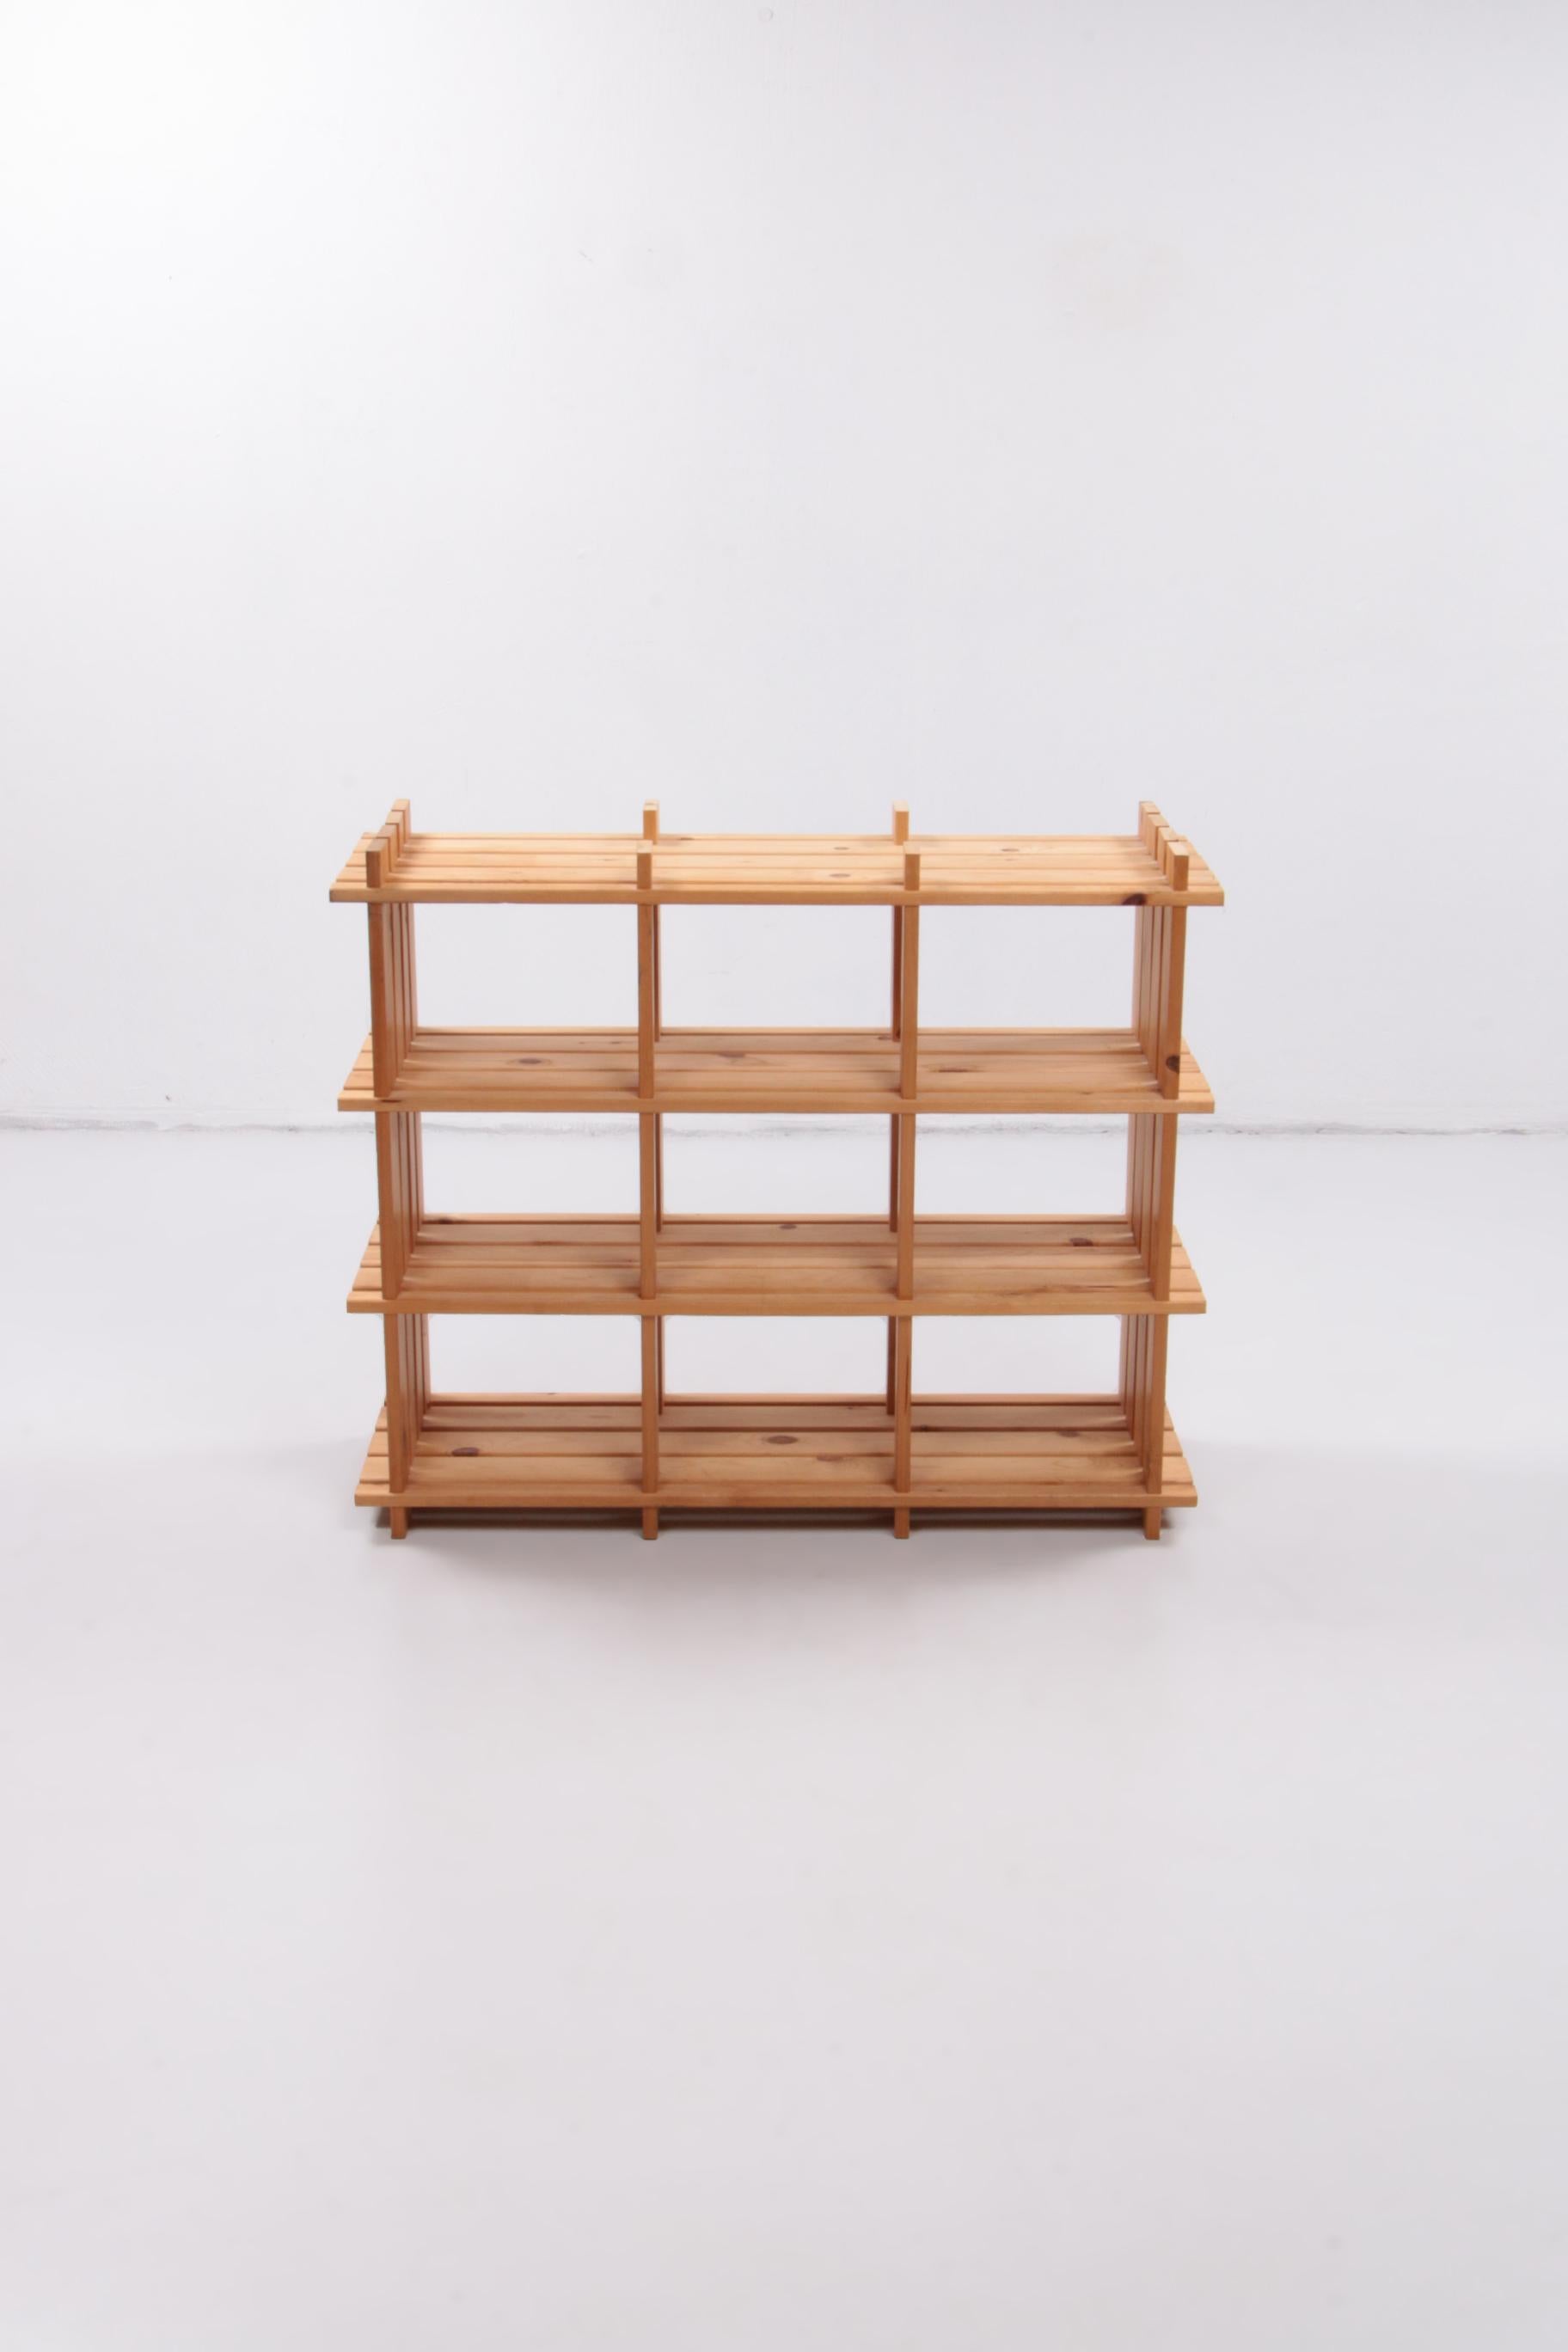 Mid-20th Century Danish Vintage Wall Unit Made of Wood, 1960s For Sale